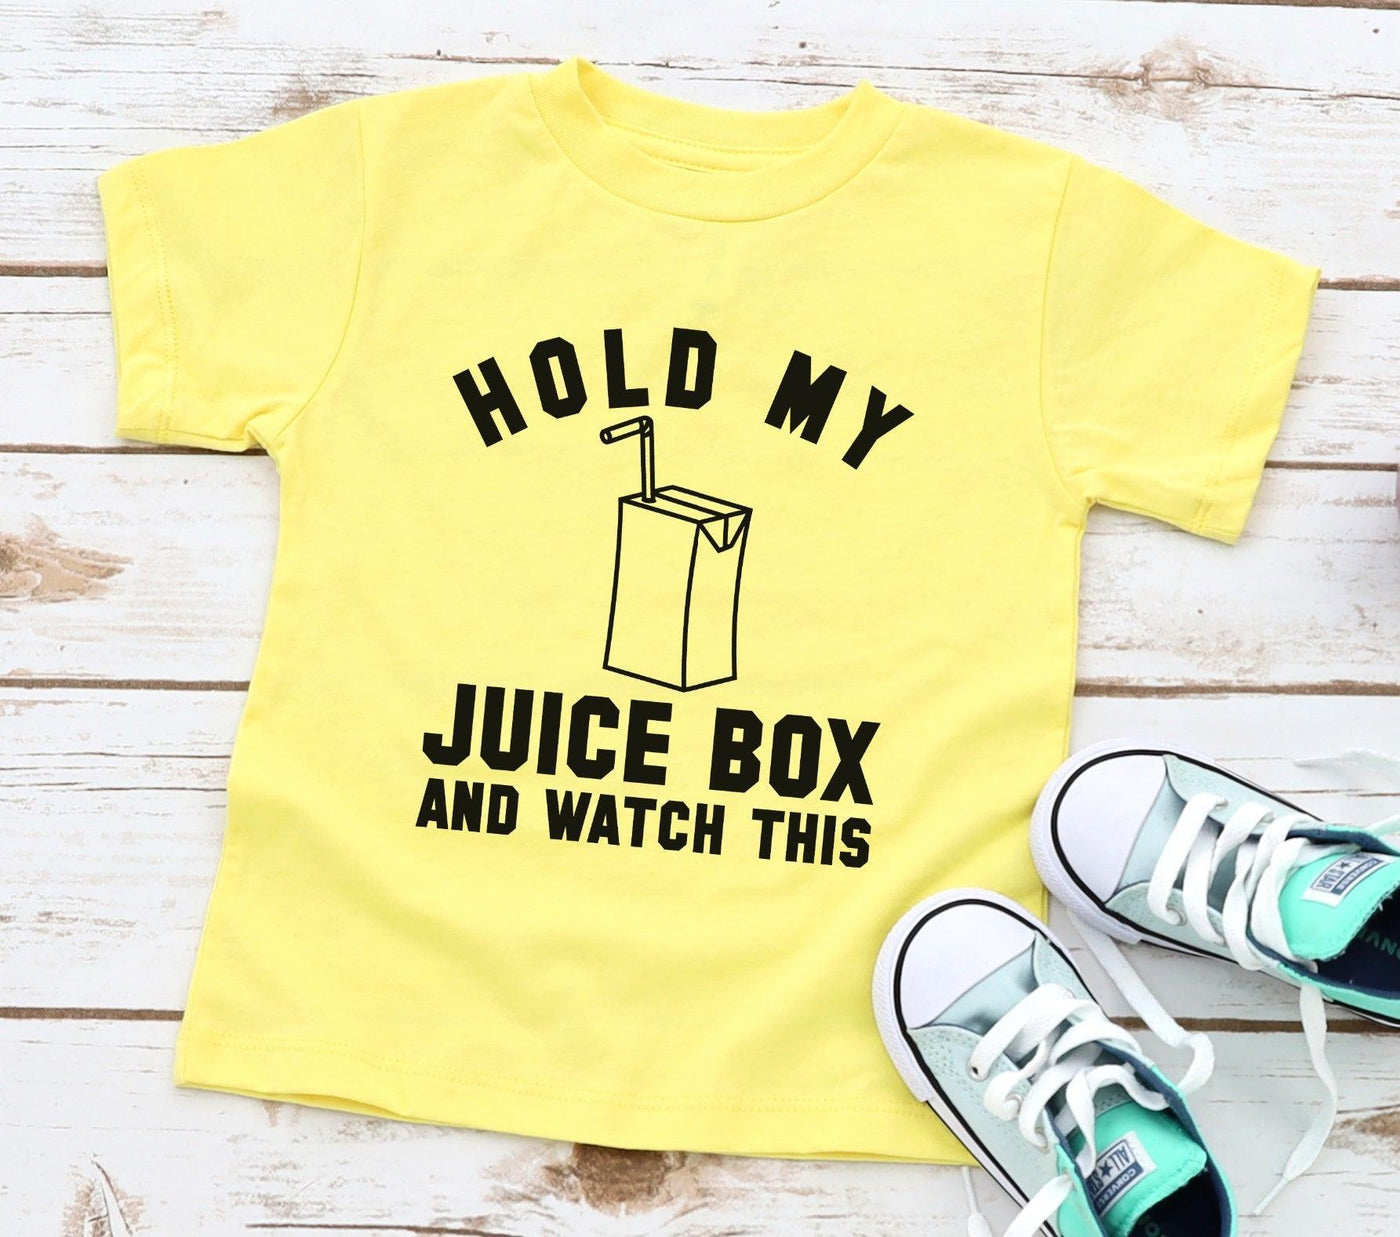 Hold my juice box and watch this - Grace & Co. Designs 